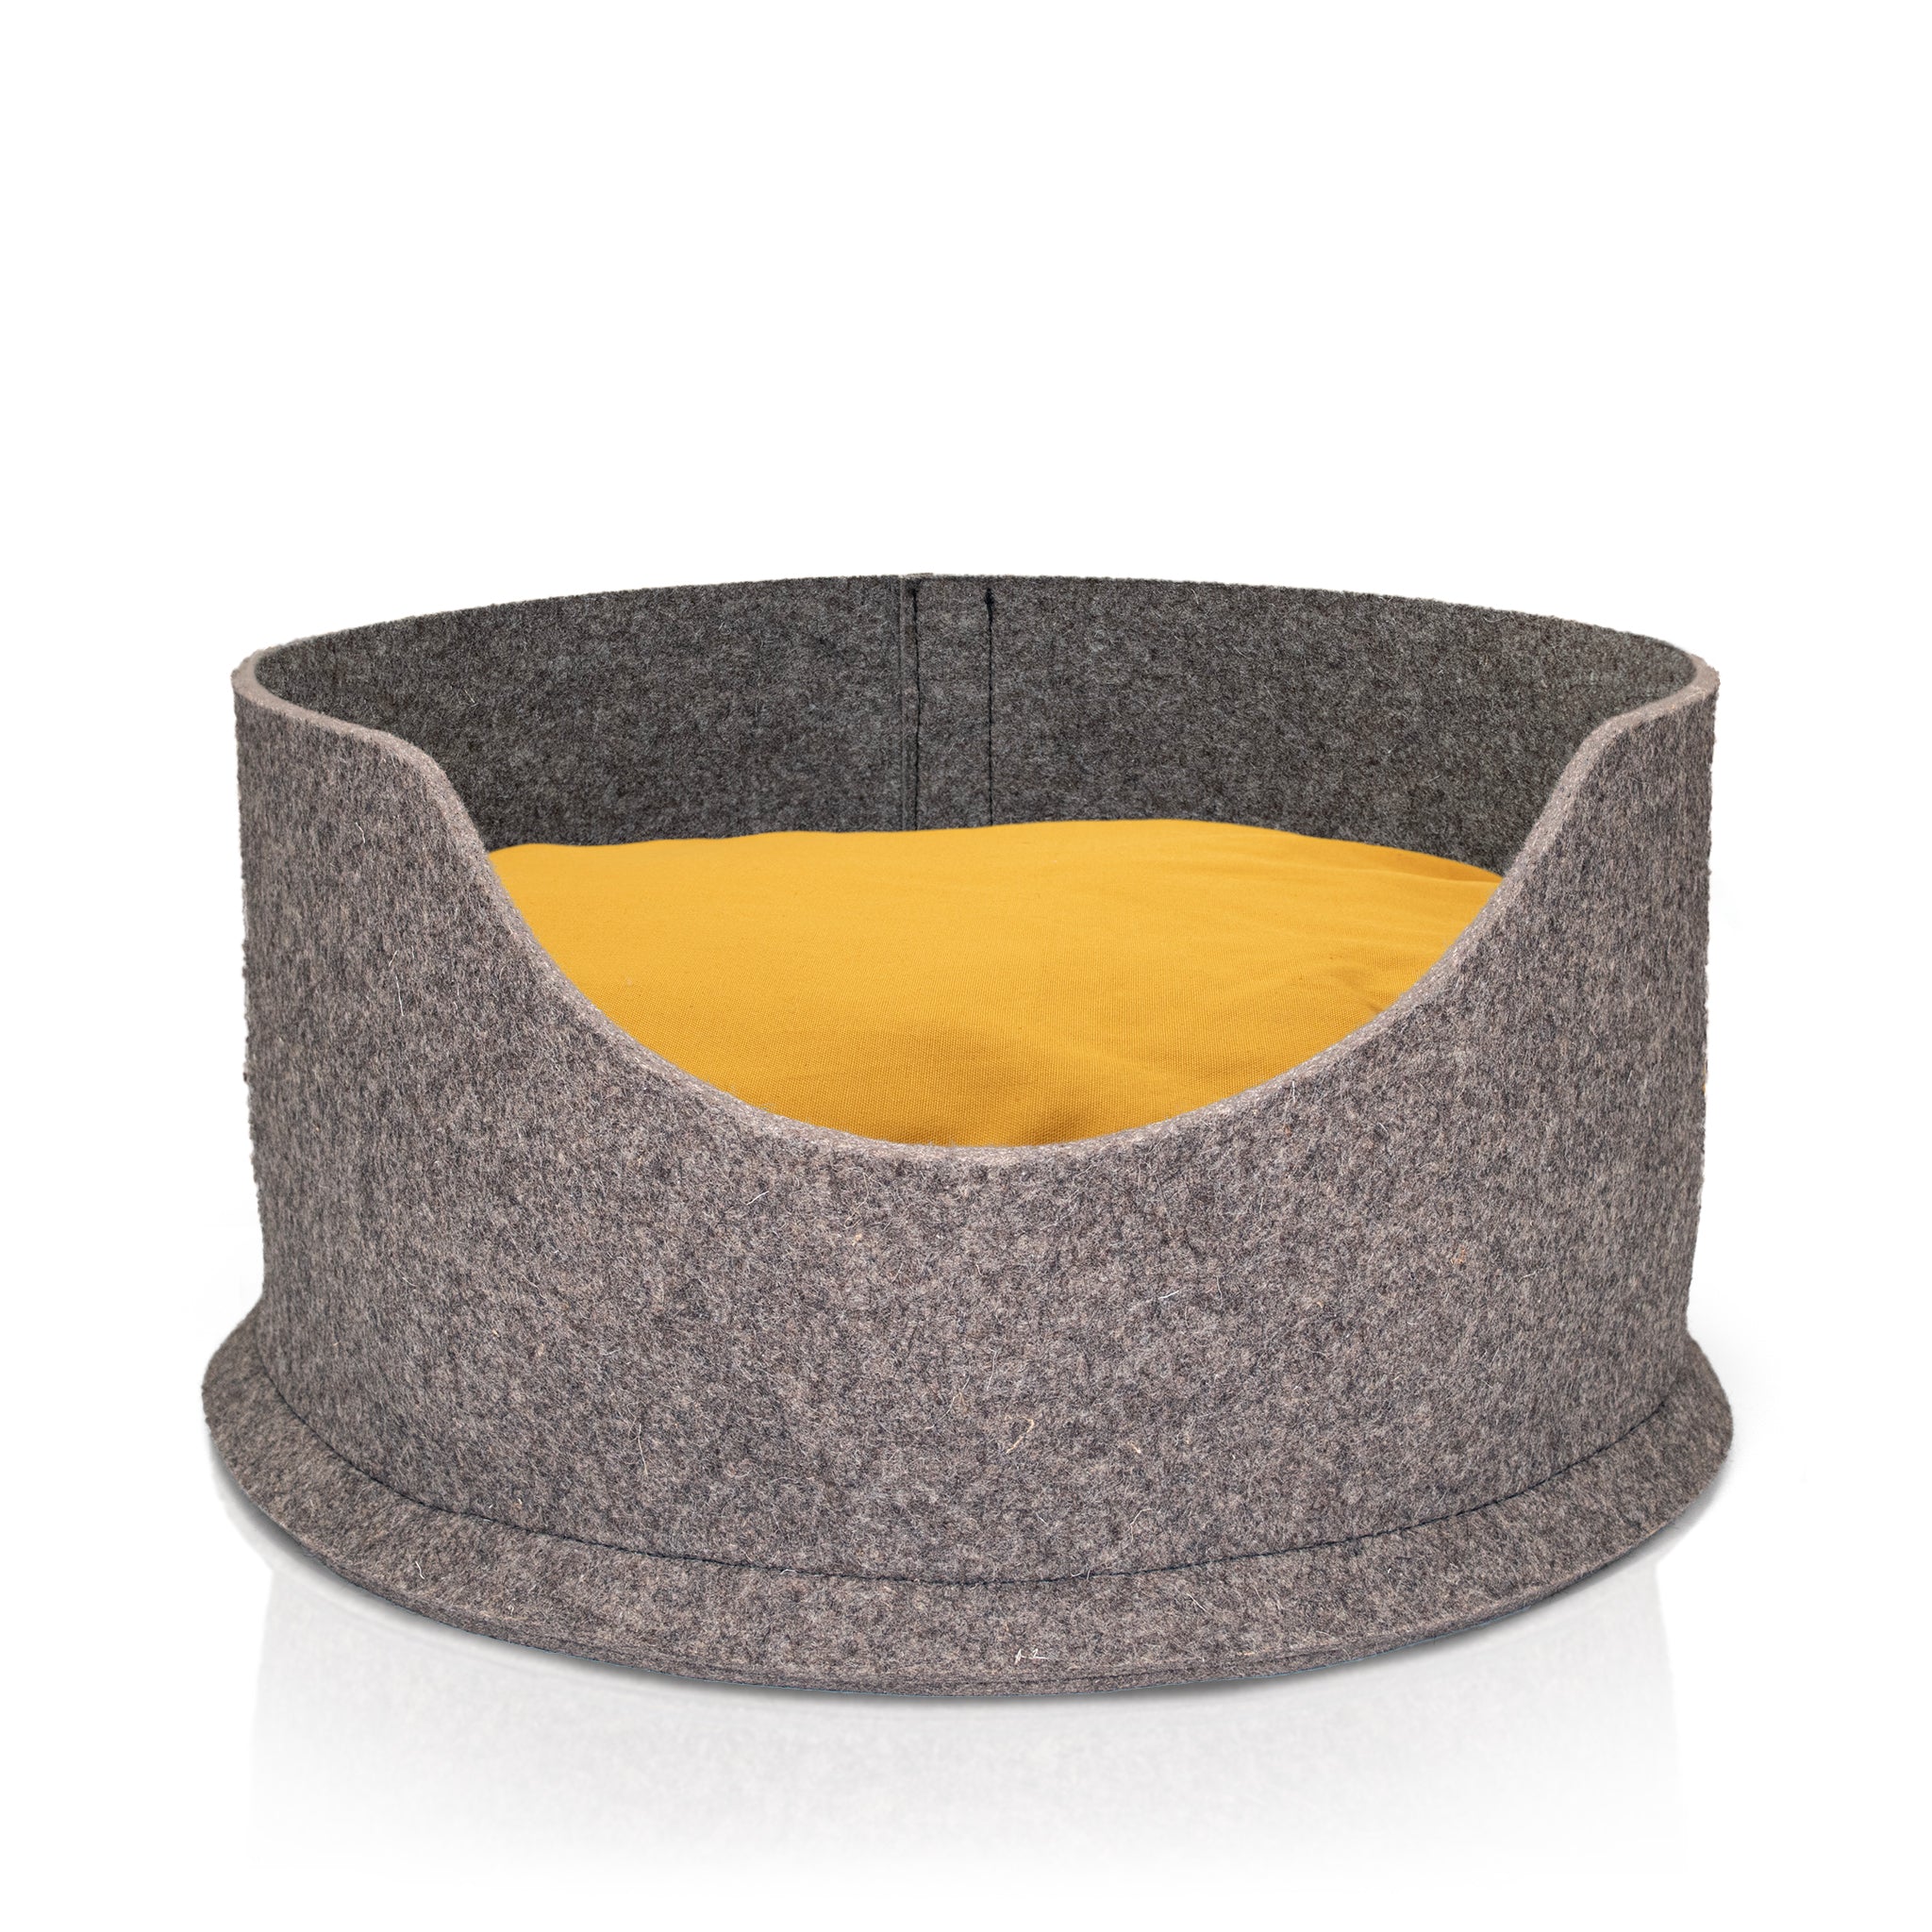 Bright yellow cushion in Chimney Sheep Plastic Free Dog and Cat Bed